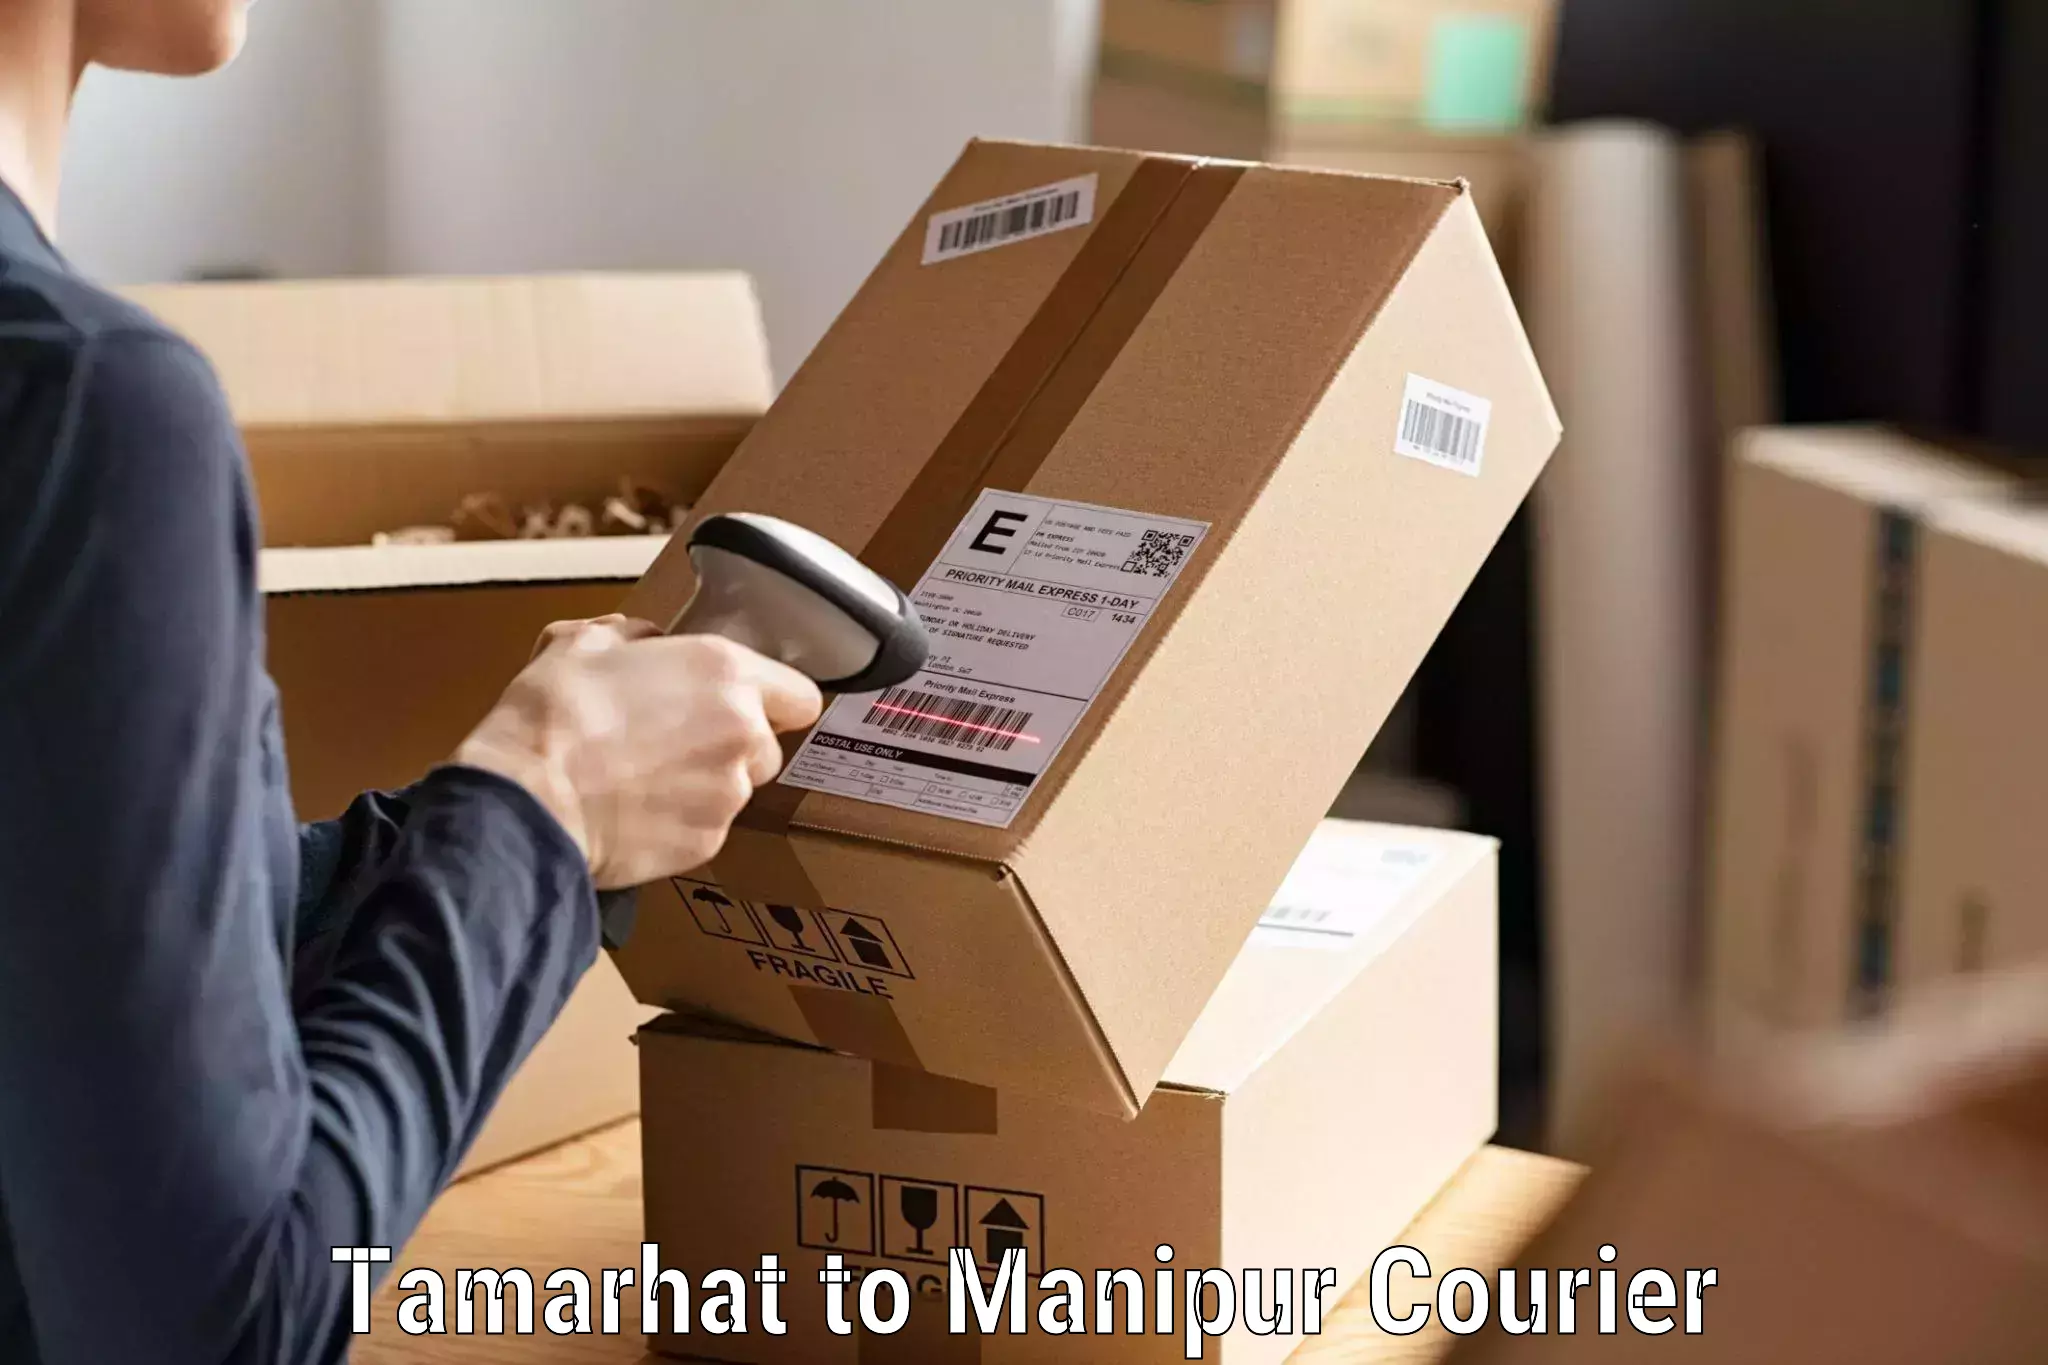 Professional courier handling Tamarhat to Ukhrul